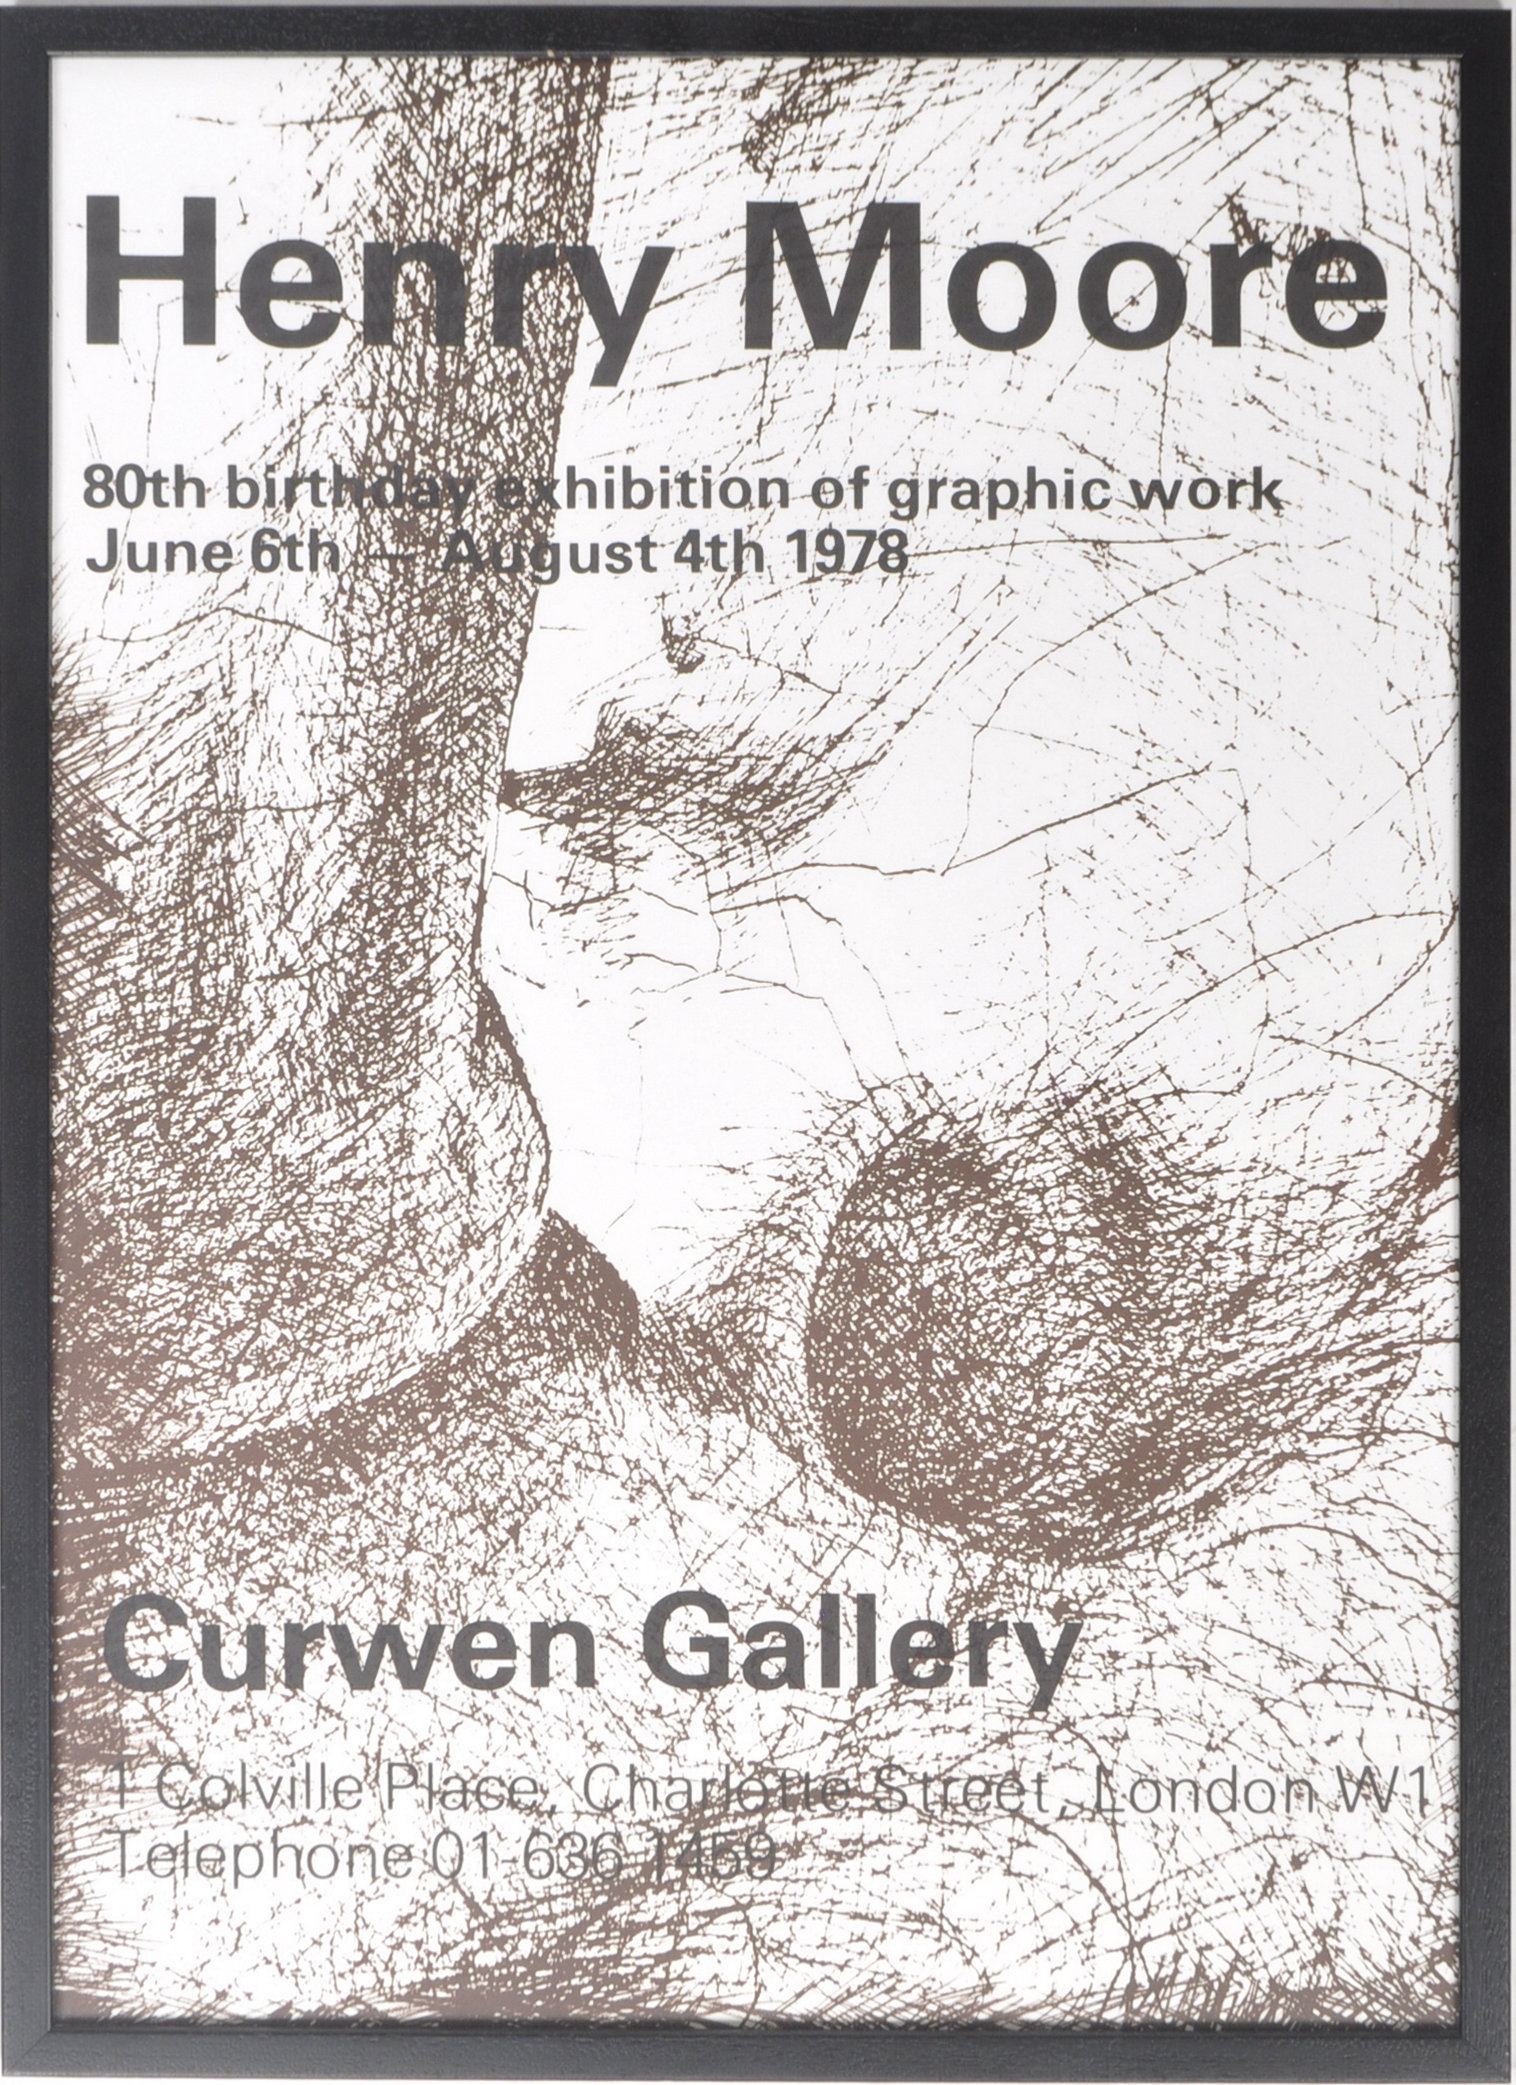 1970s GALLERY EXHIBITION POSTER FOR HENRY MOORE - Image 2 of 6